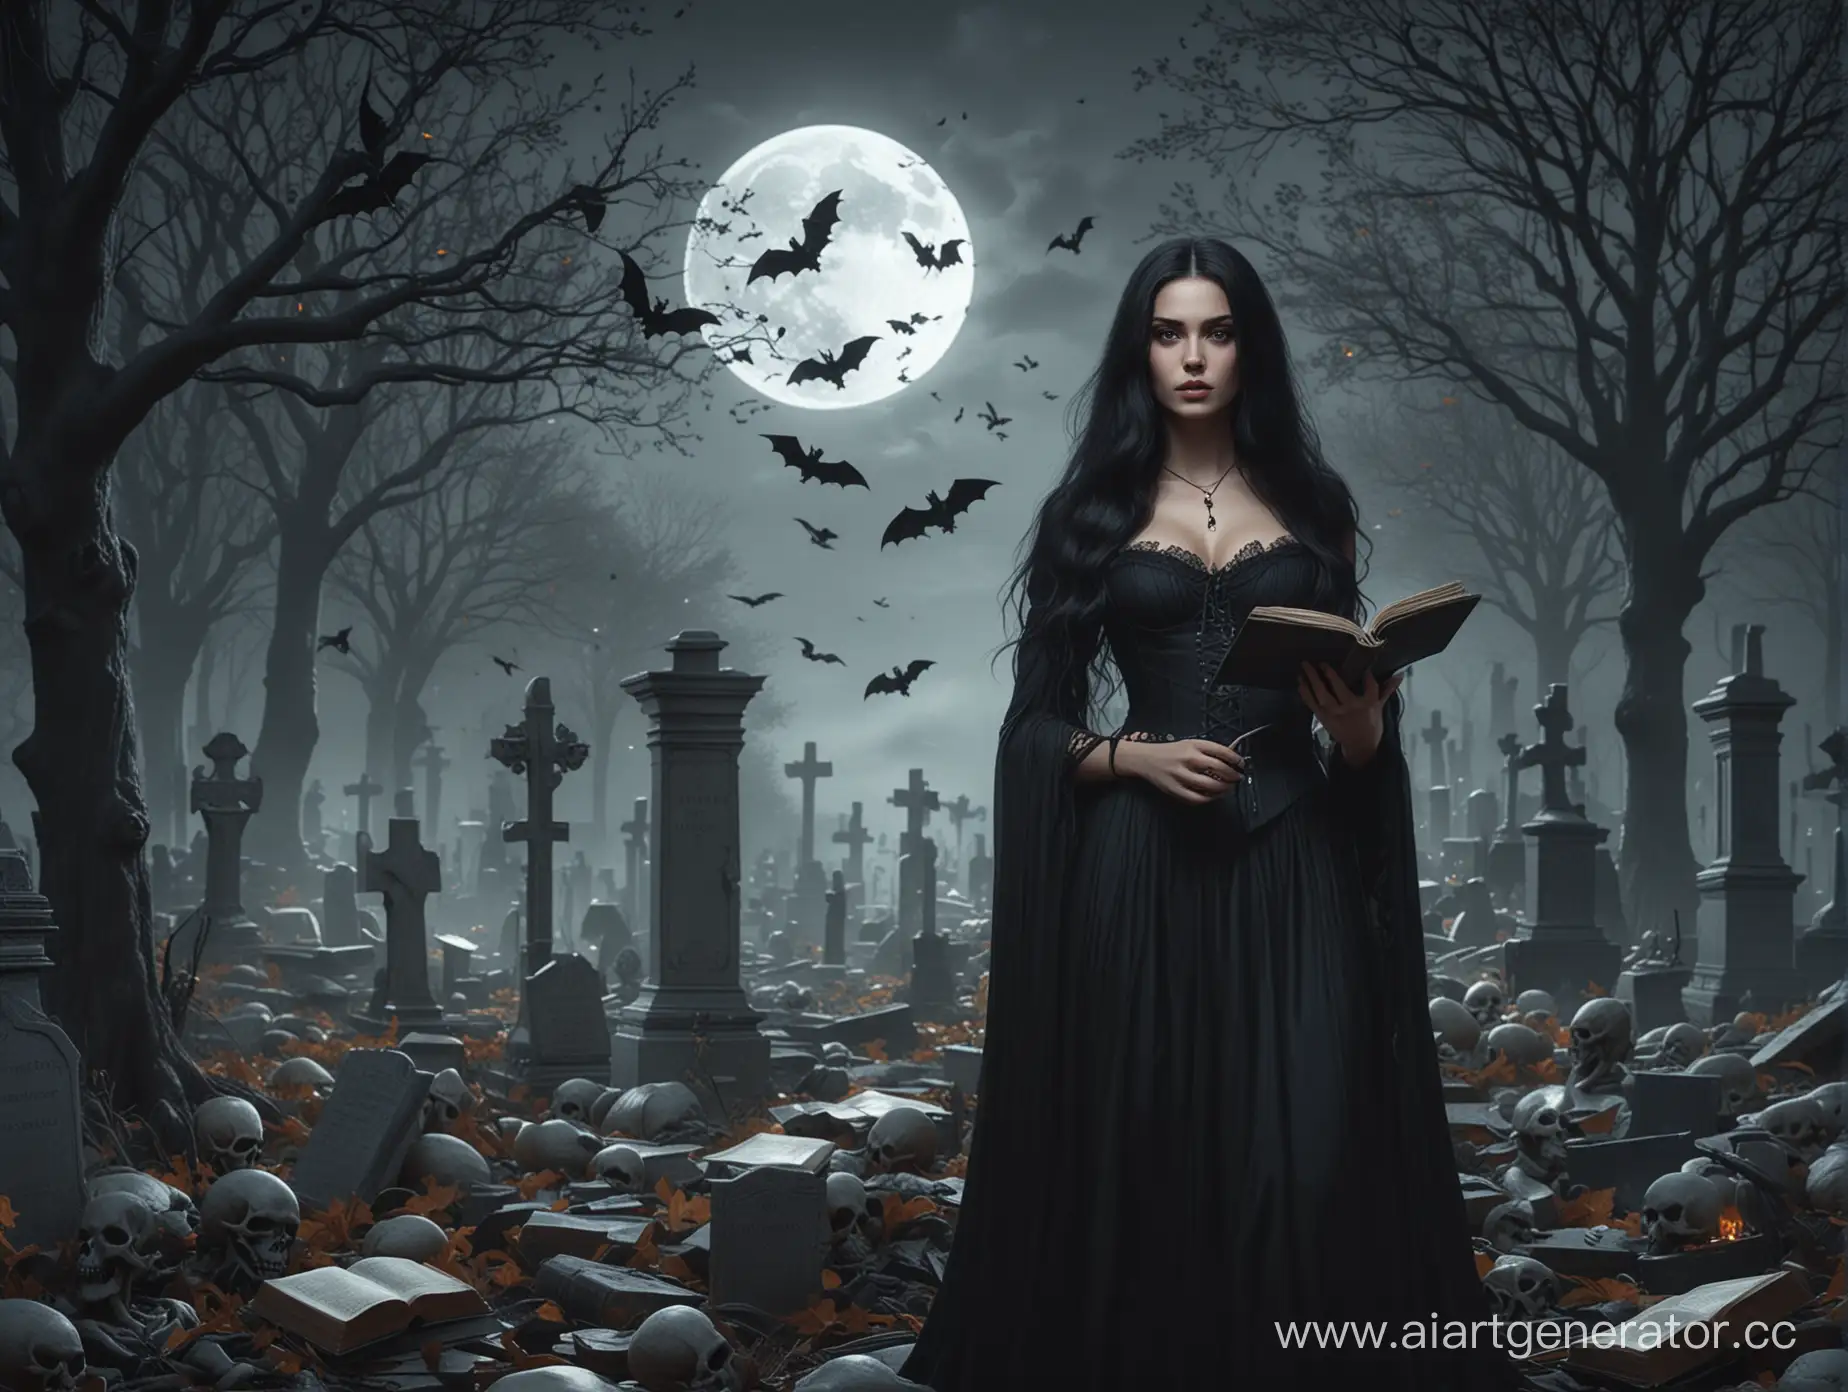 Dark-Witch-with-Skeletons-in-Cemetery-Bewitching-Horror-Art